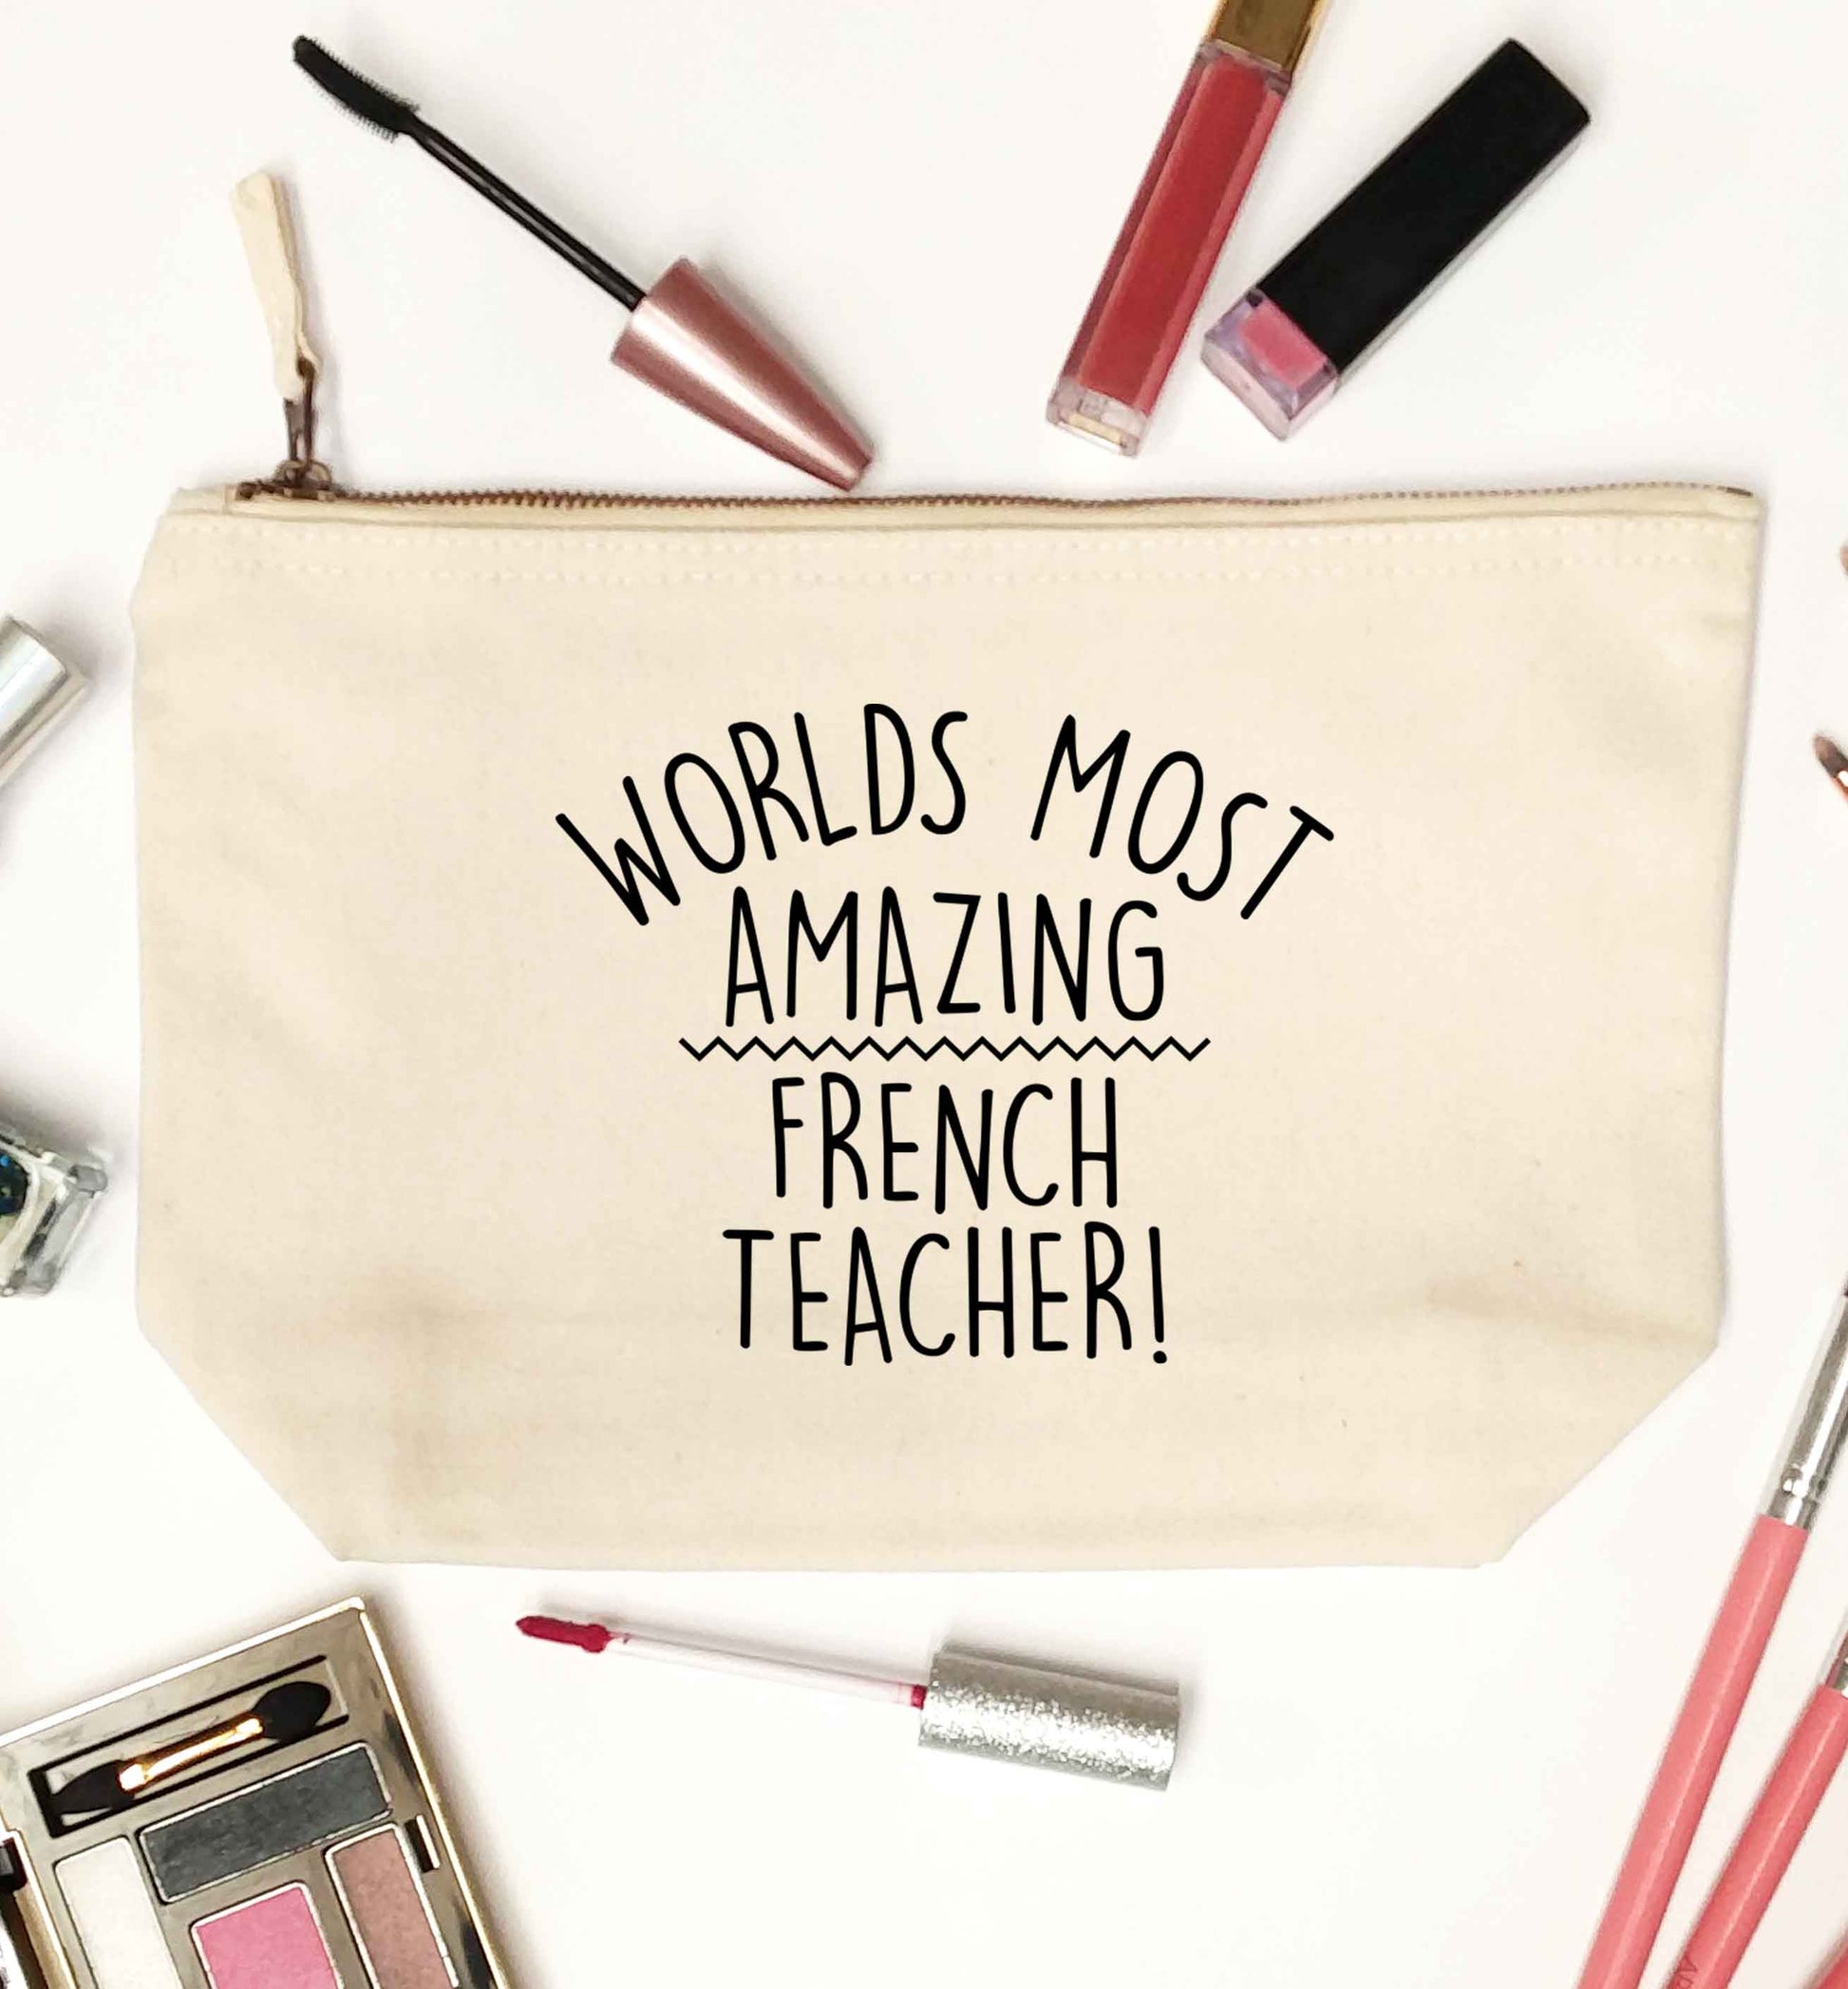 Worlds most amazing French teacher natural makeup bag